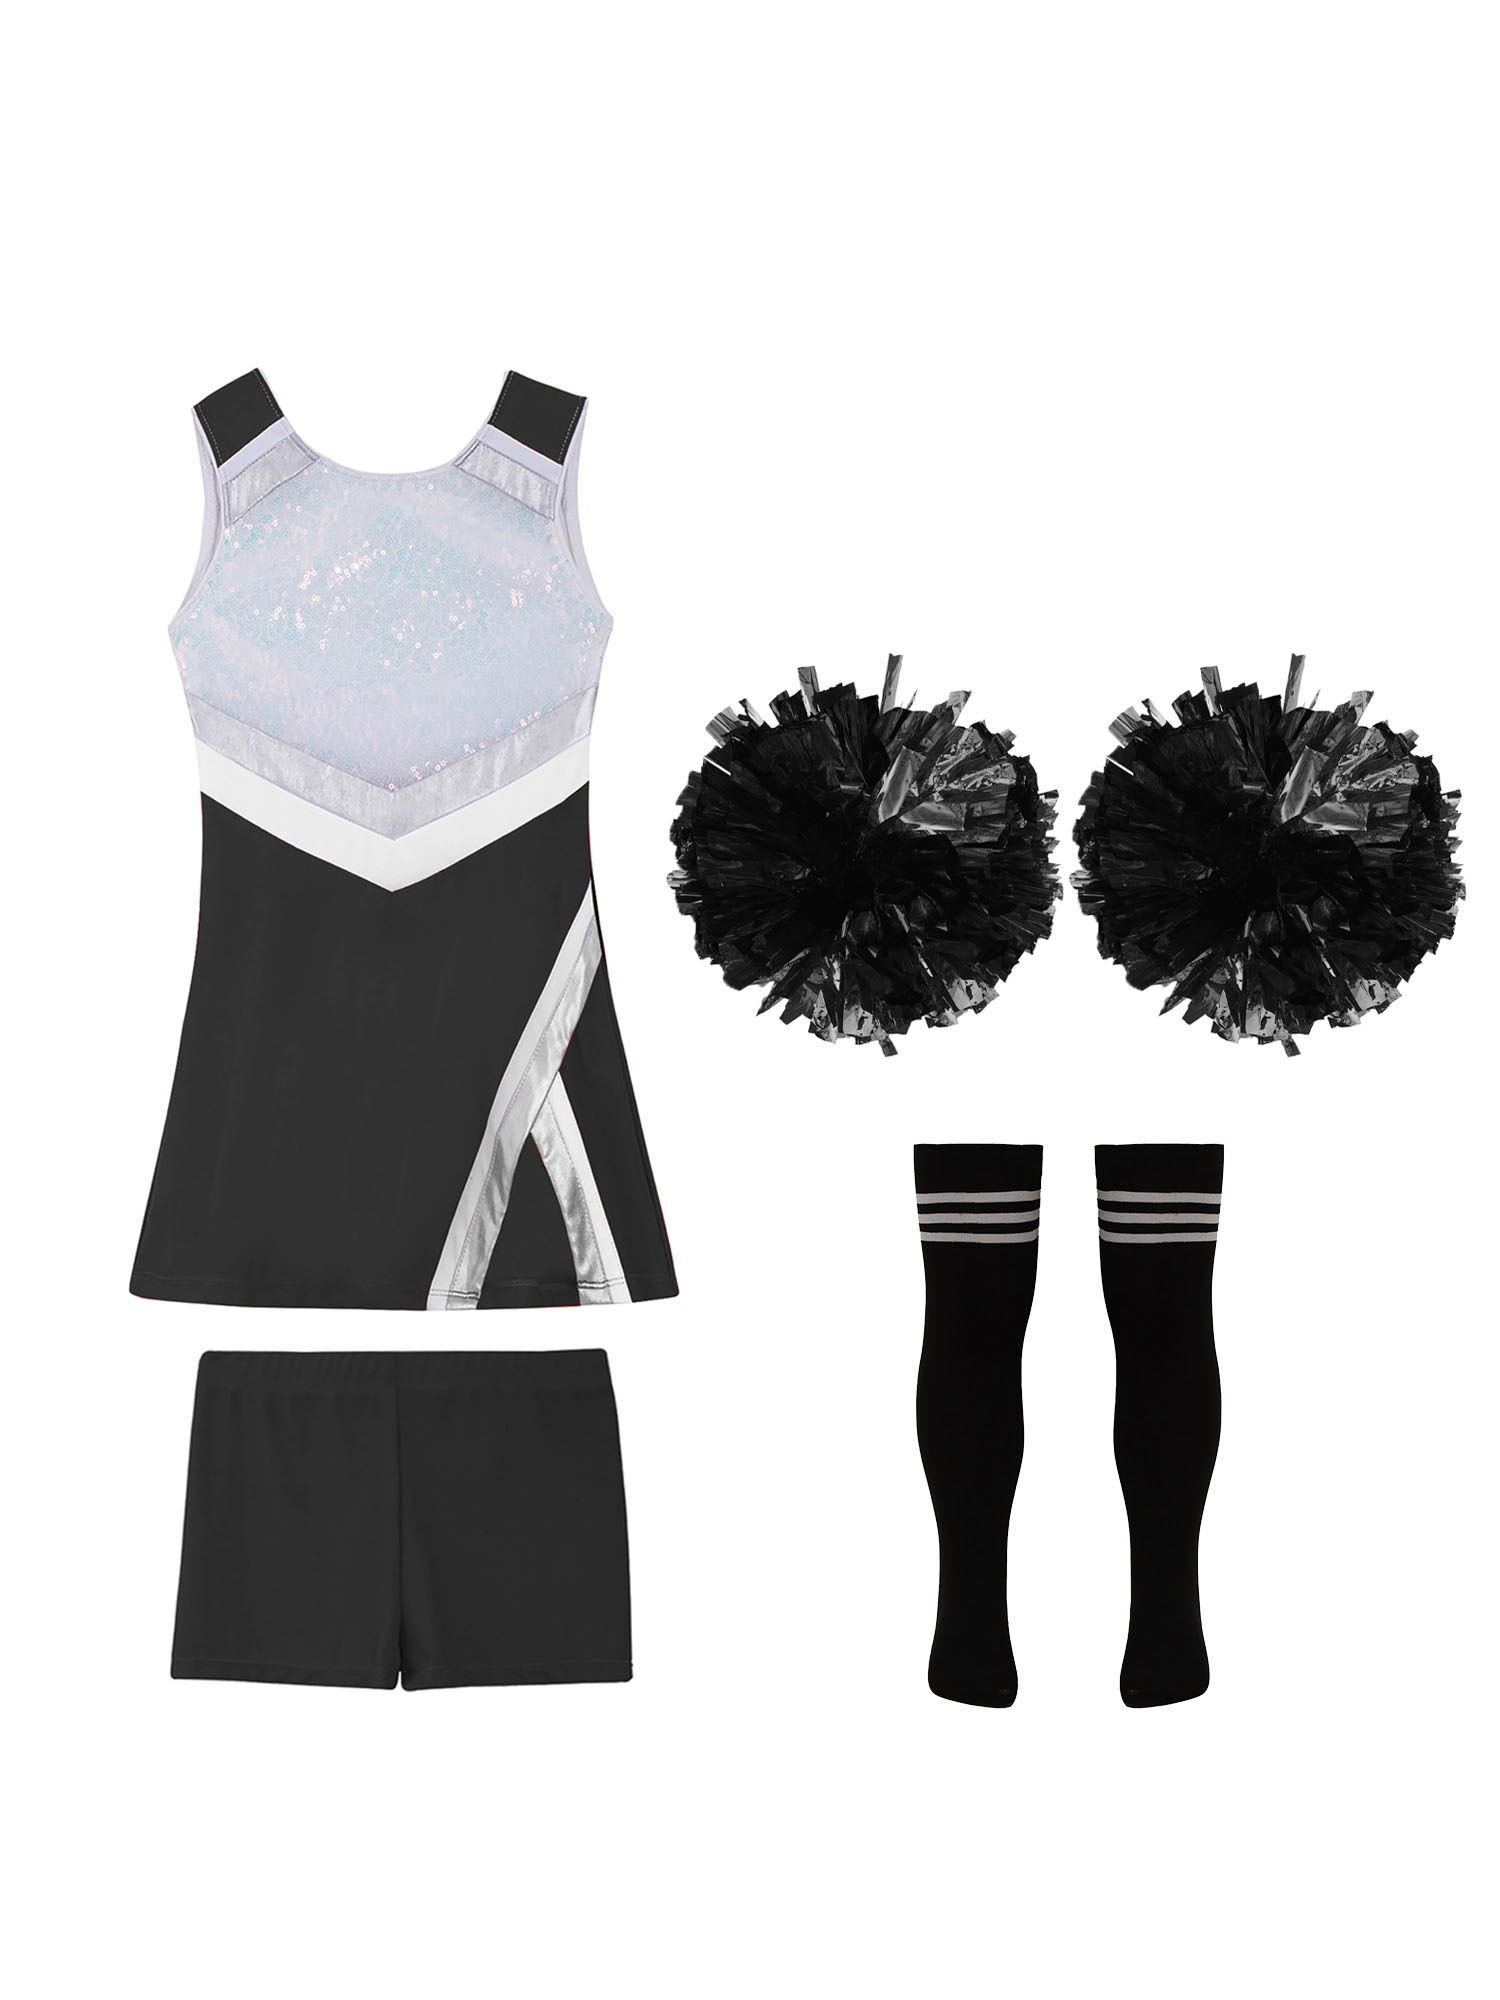 TiaoBug Kids Girls Cheer Leader Uniform Sports Games Cheerleading Dance Outfits Halloween Carnival Fancy Dress Up A Black&White-A 14 - image 3 of 5